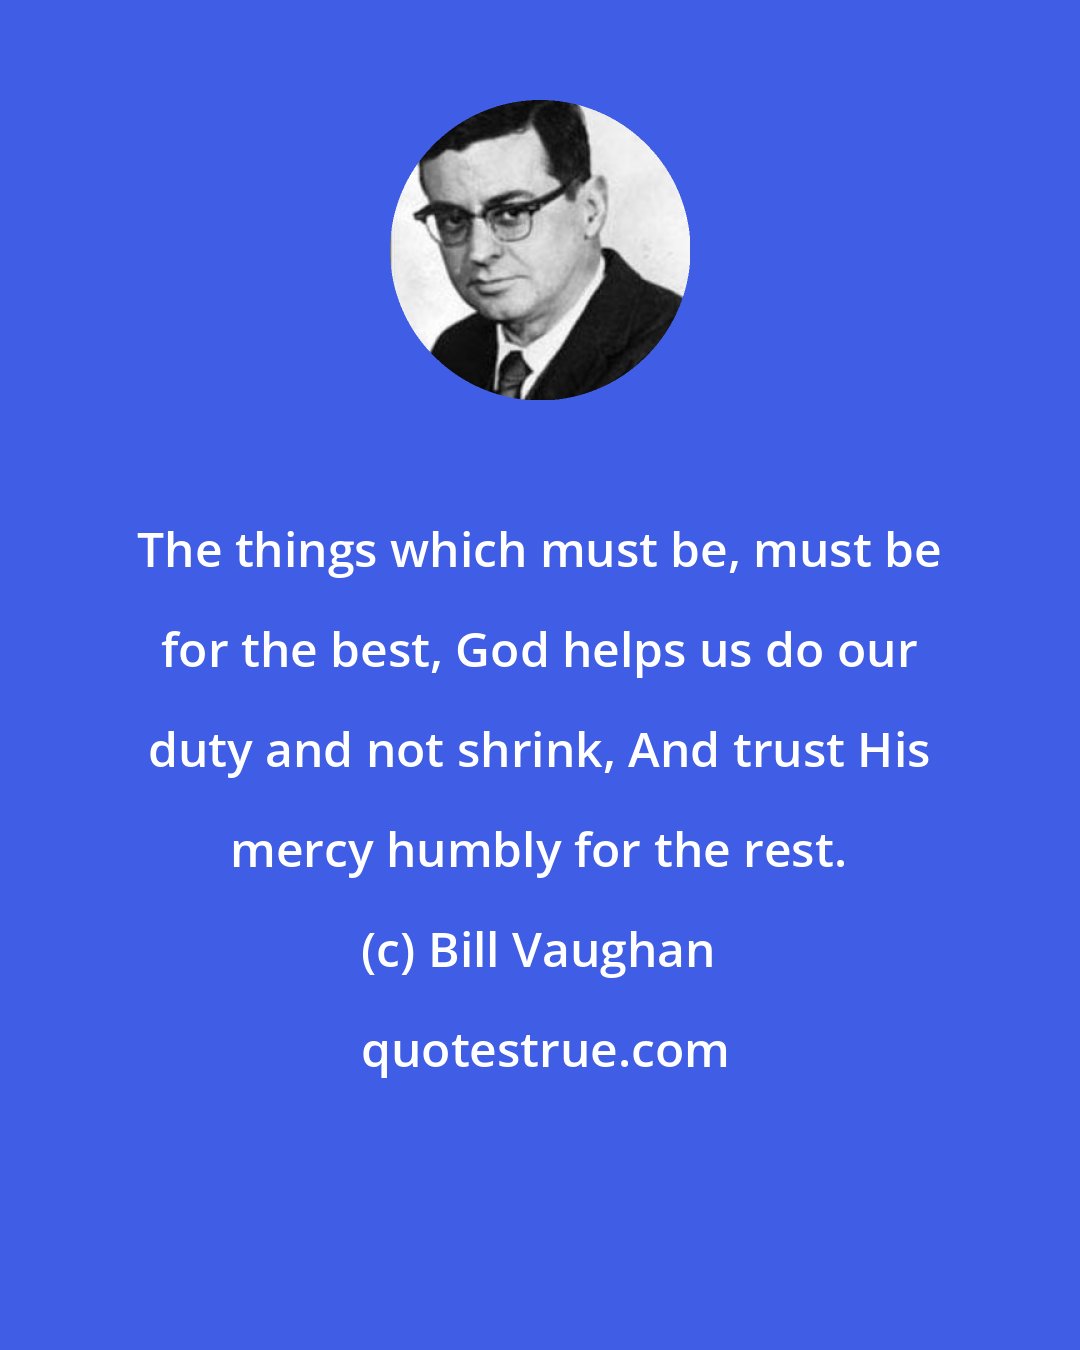 Bill Vaughan: The things which must be, must be for the best, God helps us do our duty and not shrink, And trust His mercy humbly for the rest.